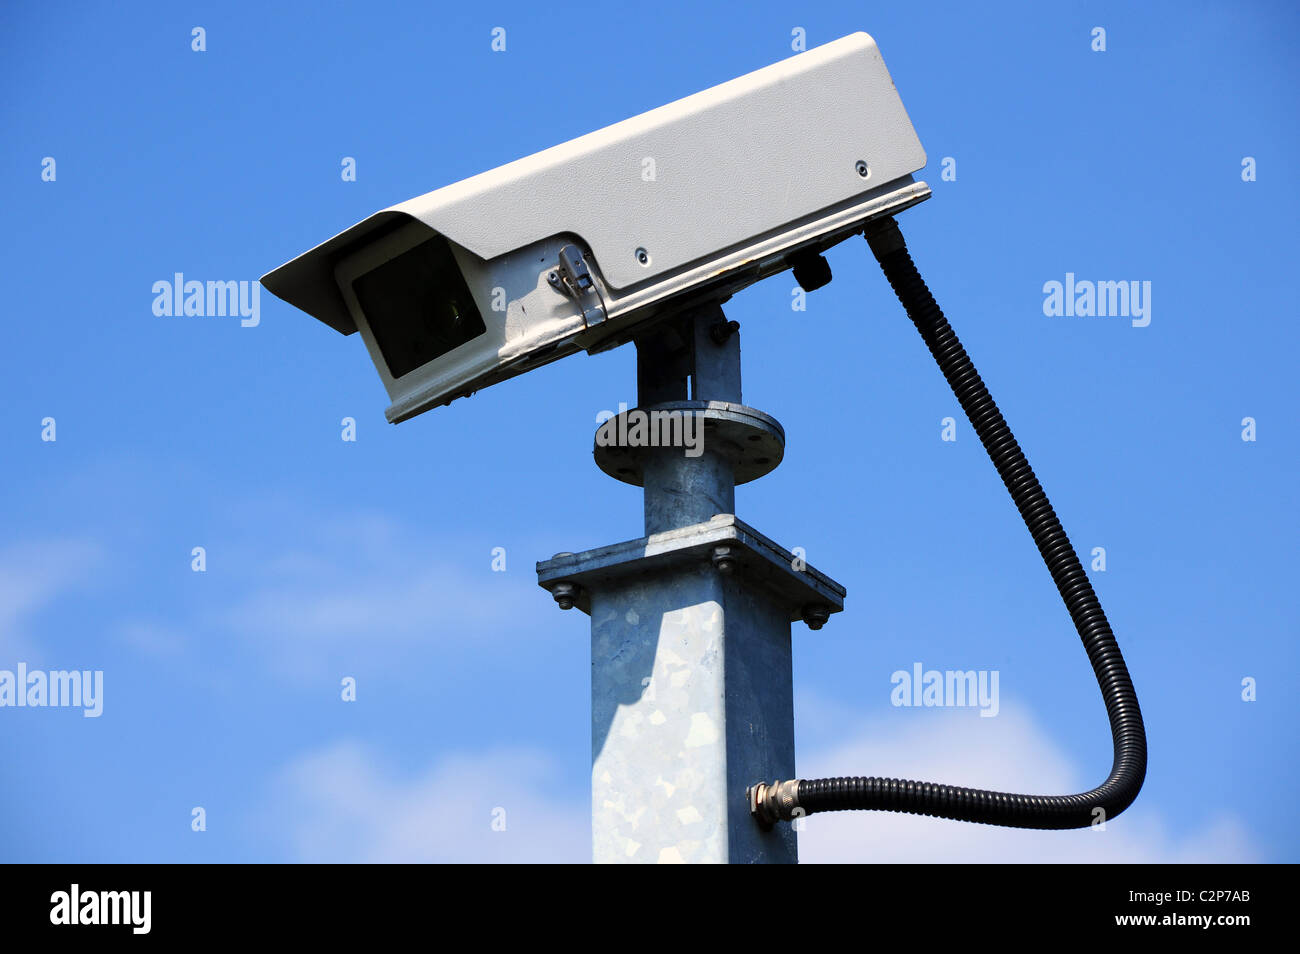 A CCTV security camera, watching our every move. Stock Photo